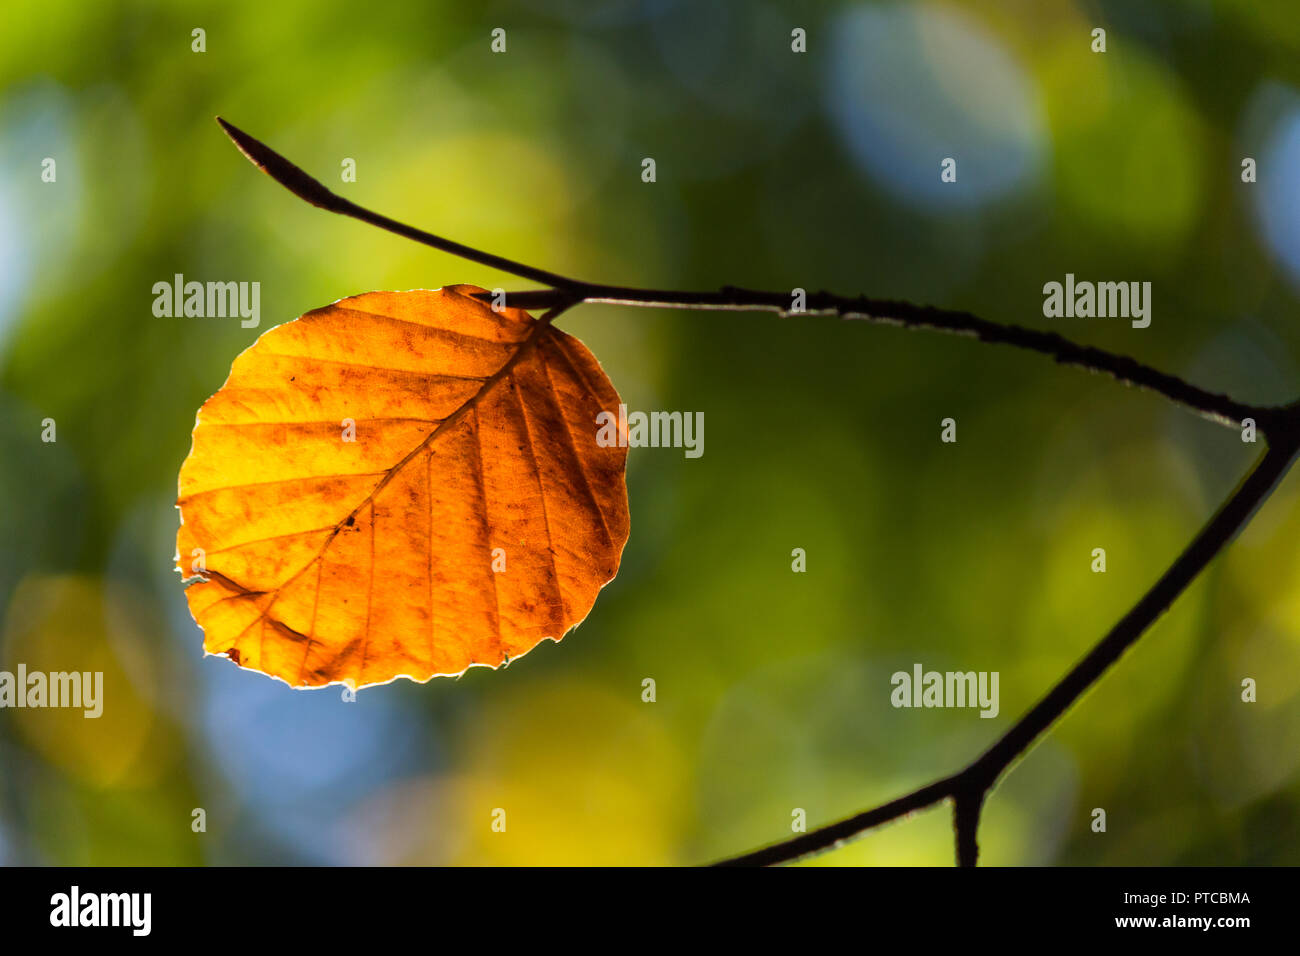 Single copper brown red leaf against a green background. Stock Photo